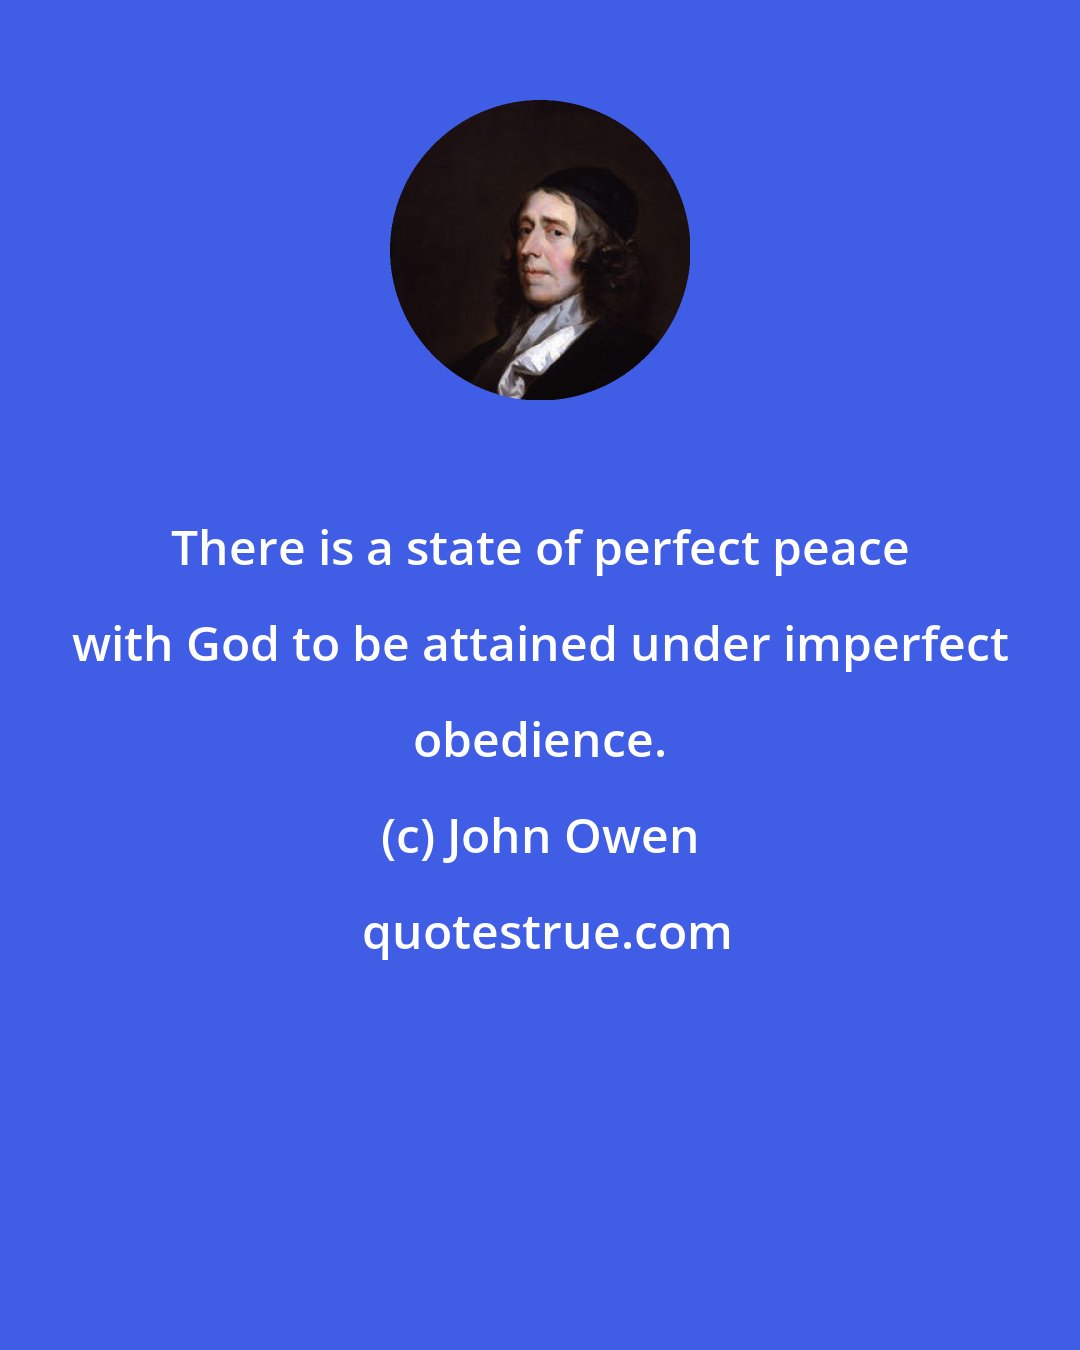 John Owen: There is a state of perfect peace with God to be attained under imperfect obedience.